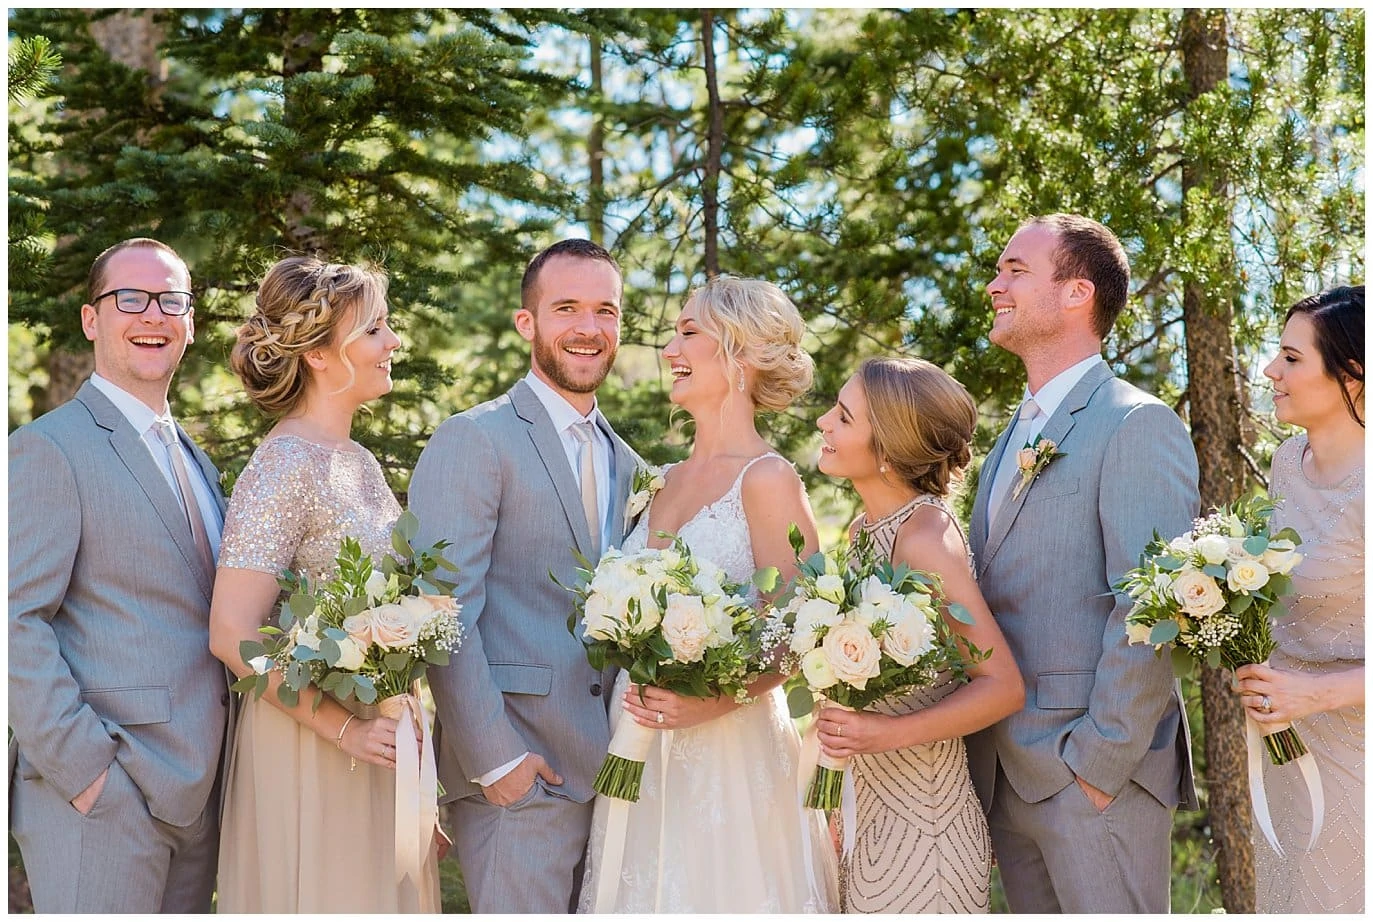 bright elegant wedding party in champagne wedding dresses and grey suites at Elegant Piney River Ranch wedding by Piney River Ranch wedding photographer Jennie Crate, Photographer